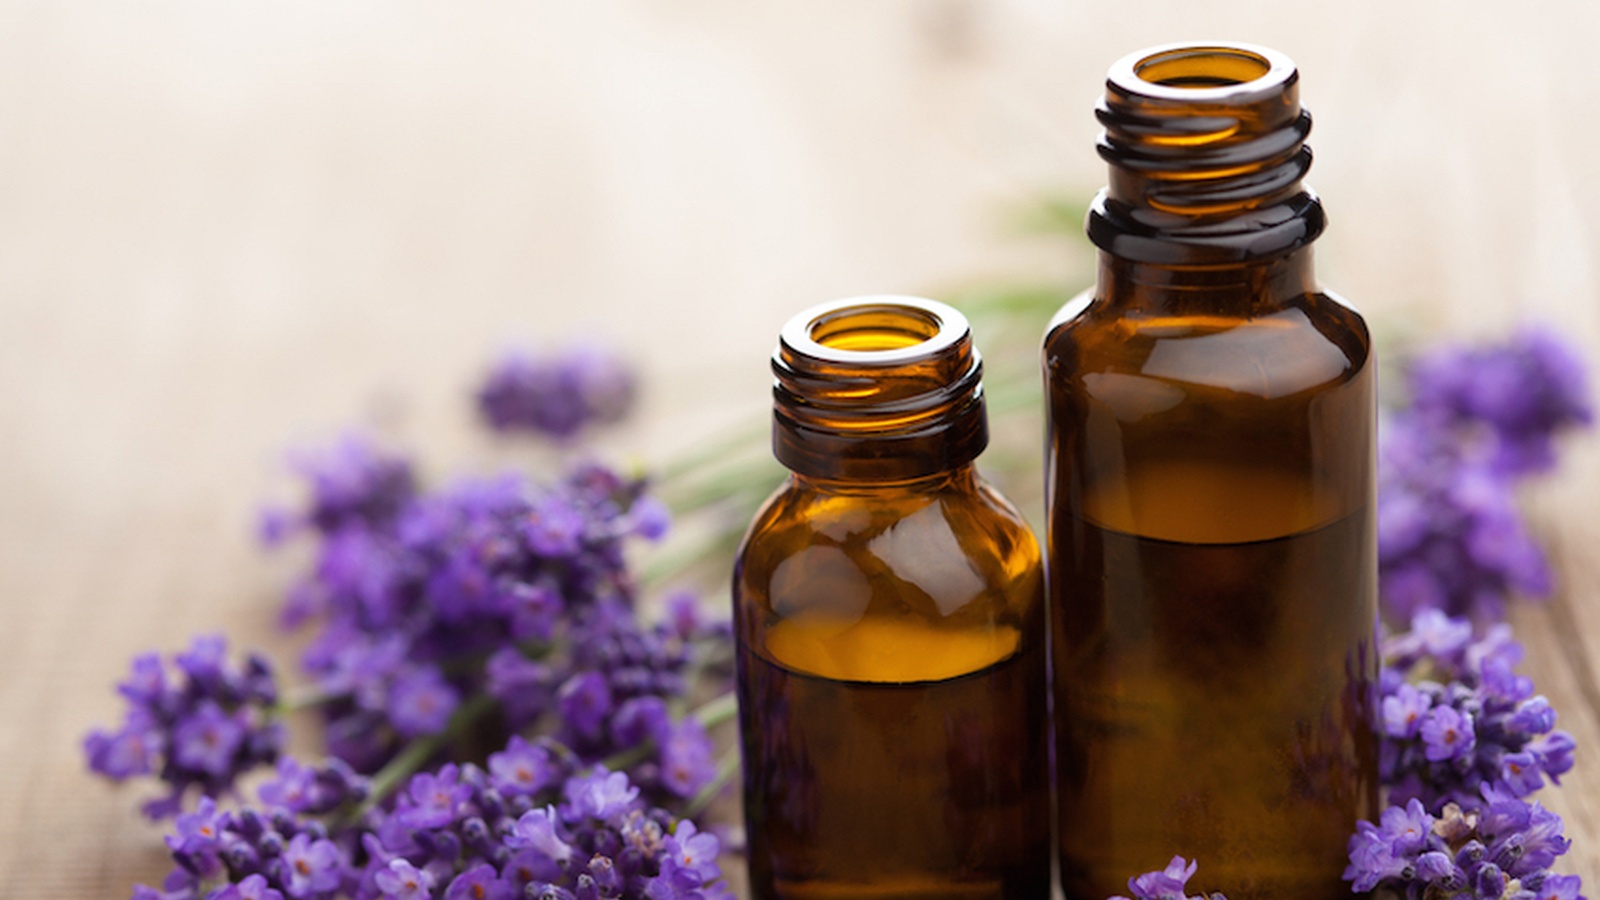 Dr Z's Essential Oil Tips For Treating Leaky Gut!